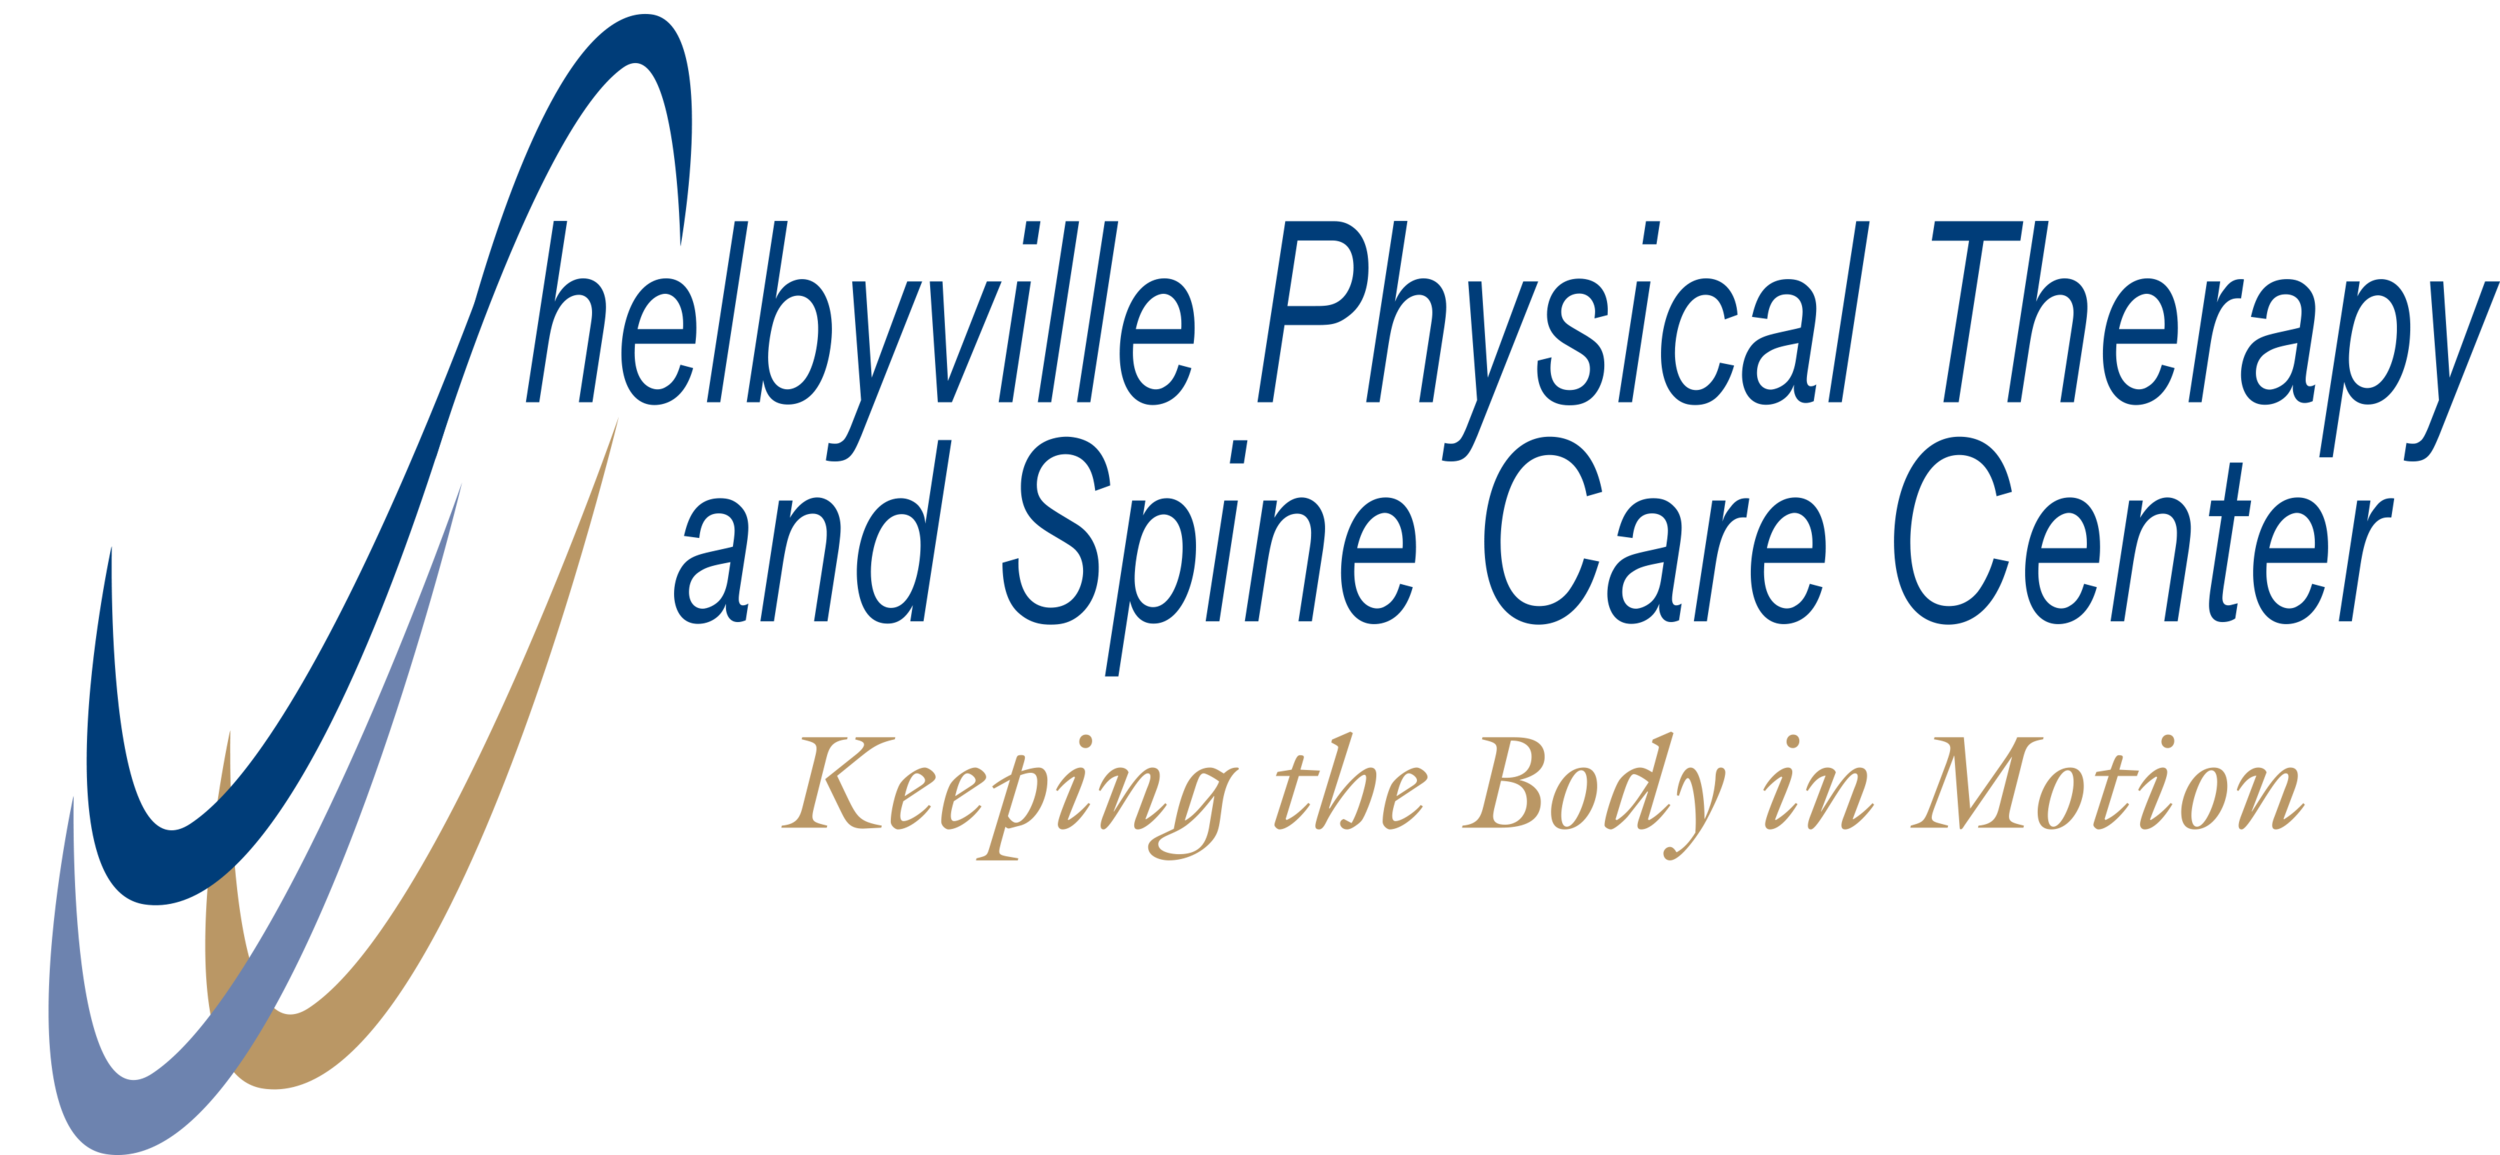 Shelbyville Physical Therapy &amp; Spine Care Center